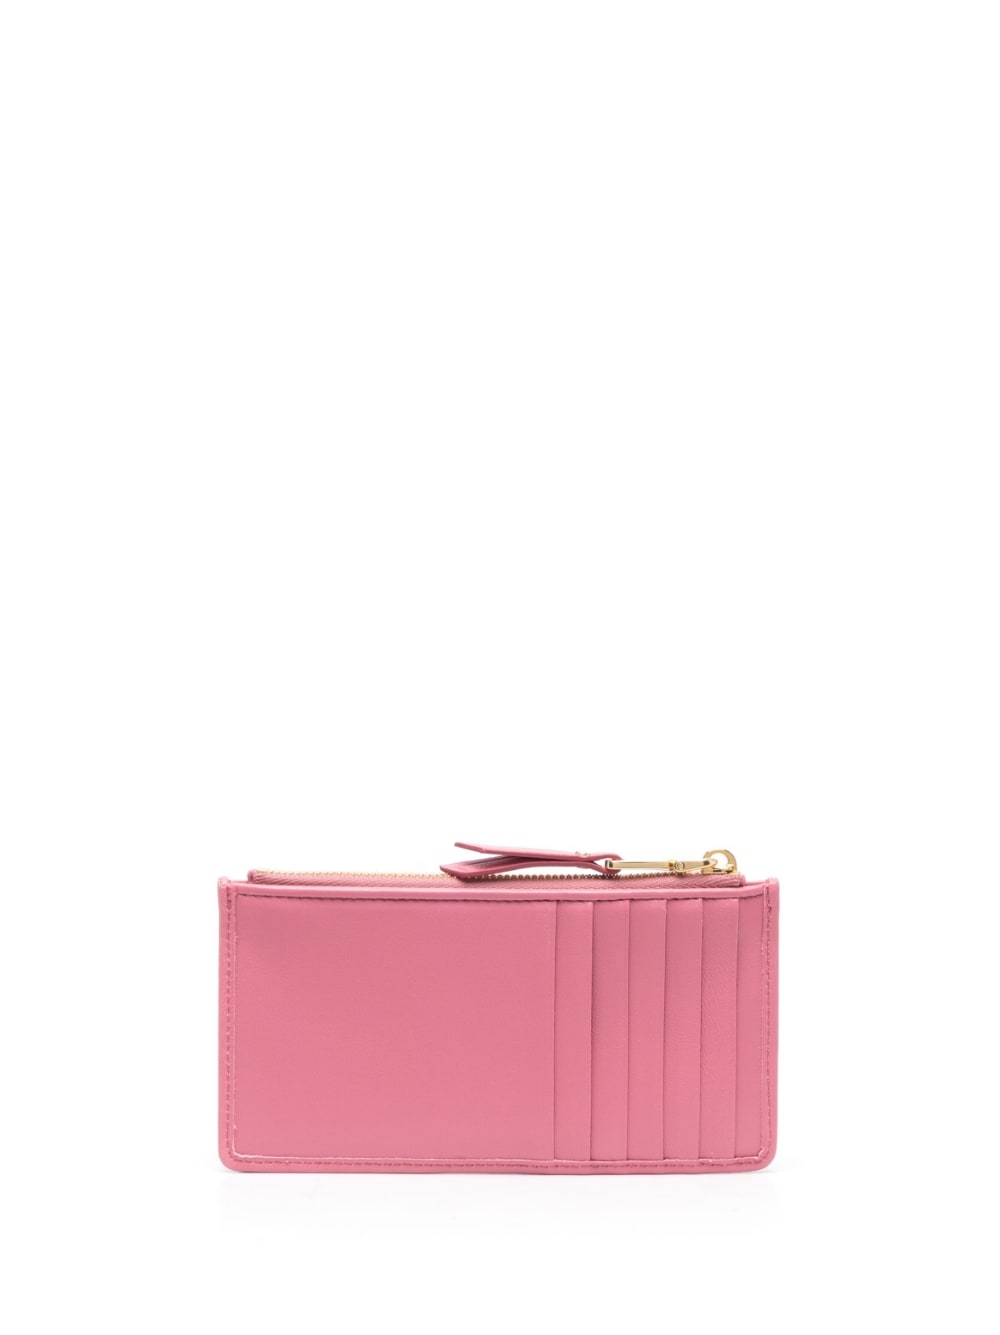 MIUMIU PINK LEATHER CARD HOLDER WITH ZIPPER